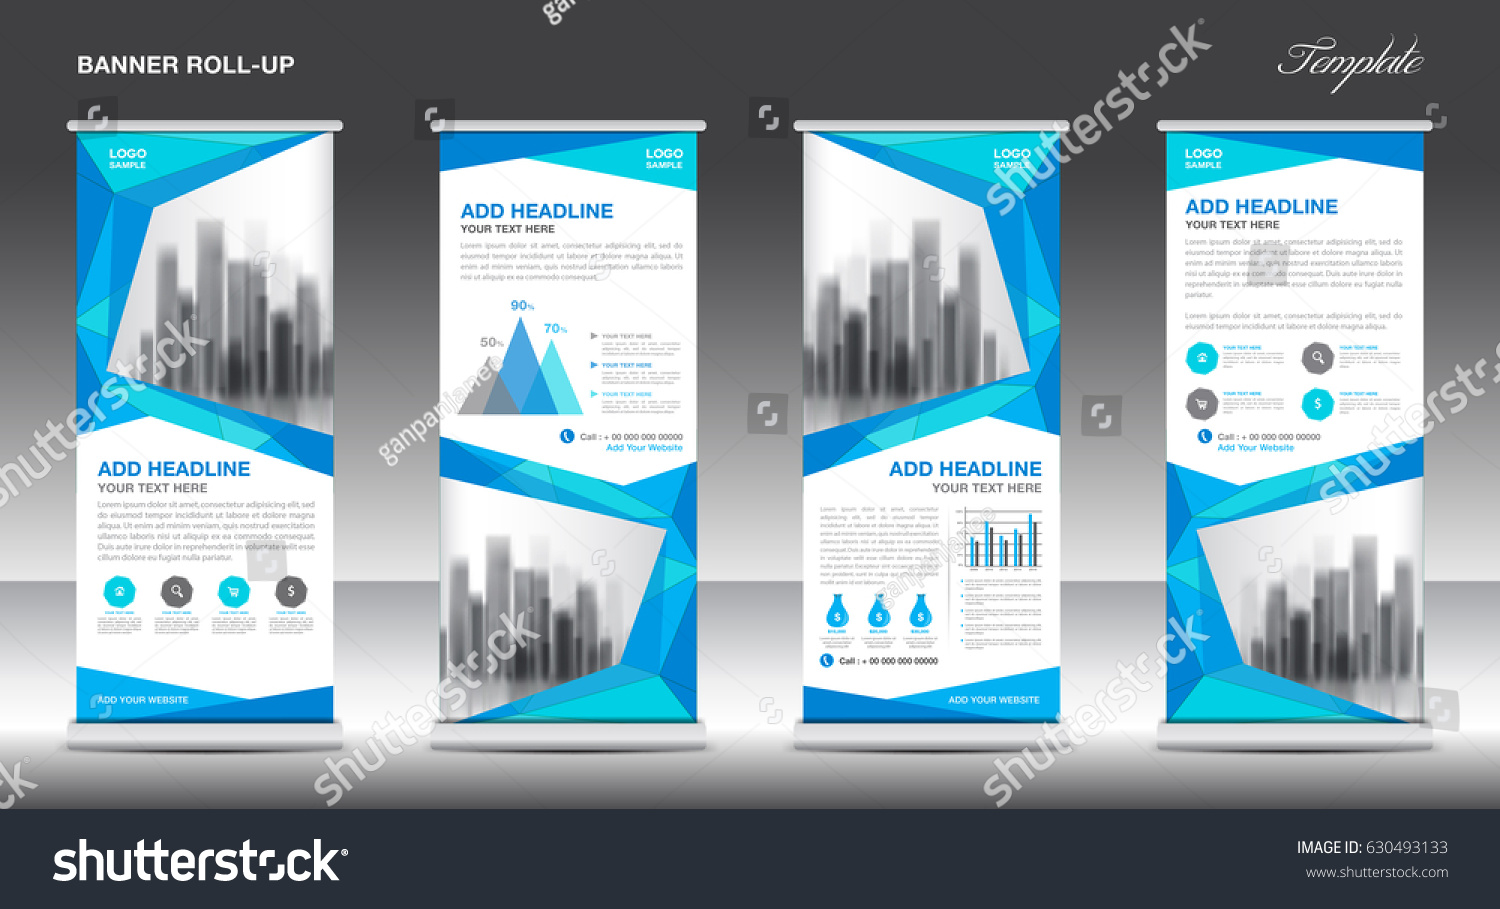 Roll up banner stand template design, Blue banner layout, advertisement, polygon background, pull up, vector illustration, business flyer, display, x-banner, flag-banner, infographics, presentation #630493133